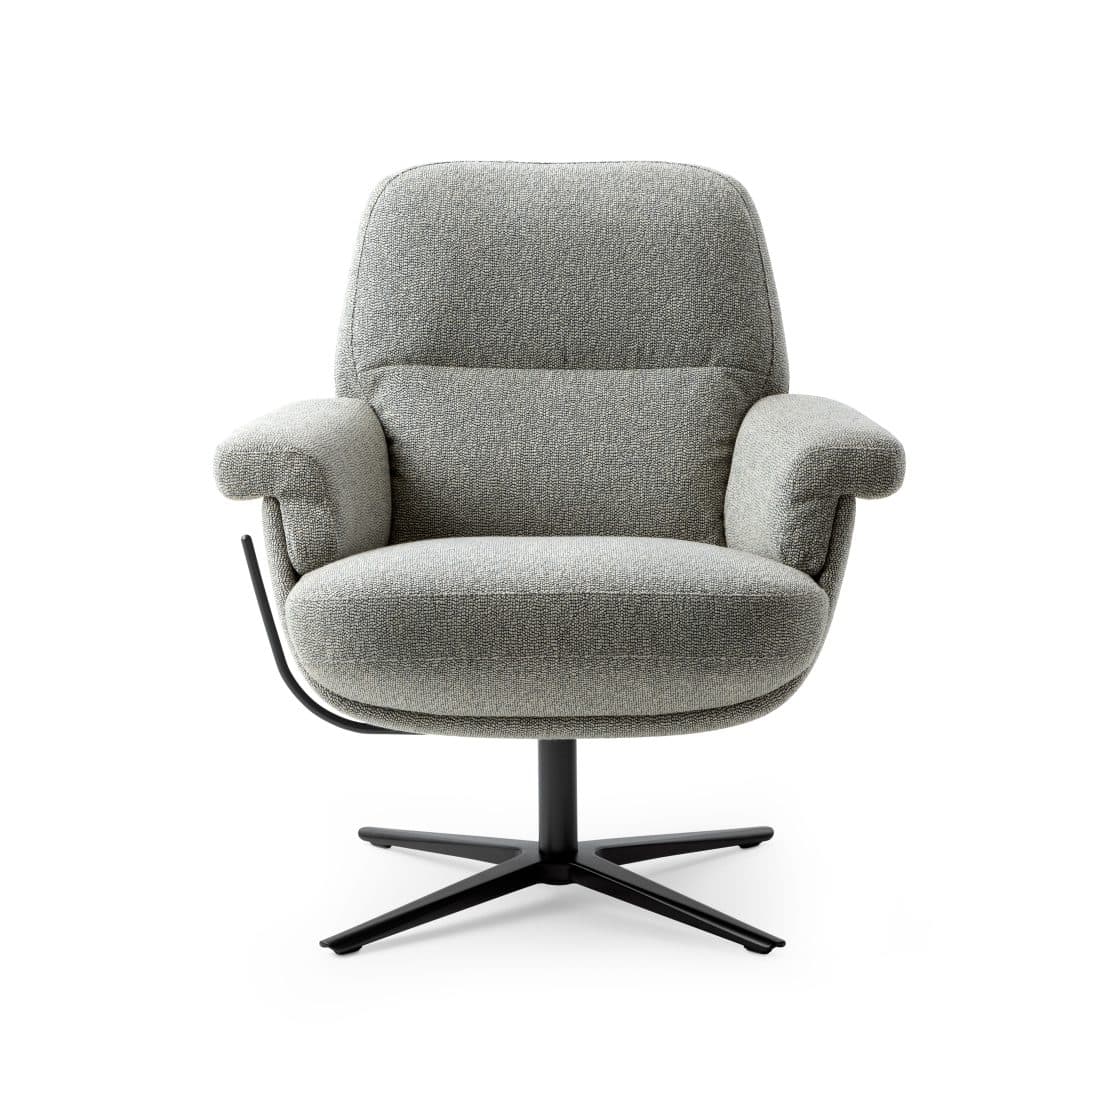 Vidence Entro One Amp Two Fauteuil